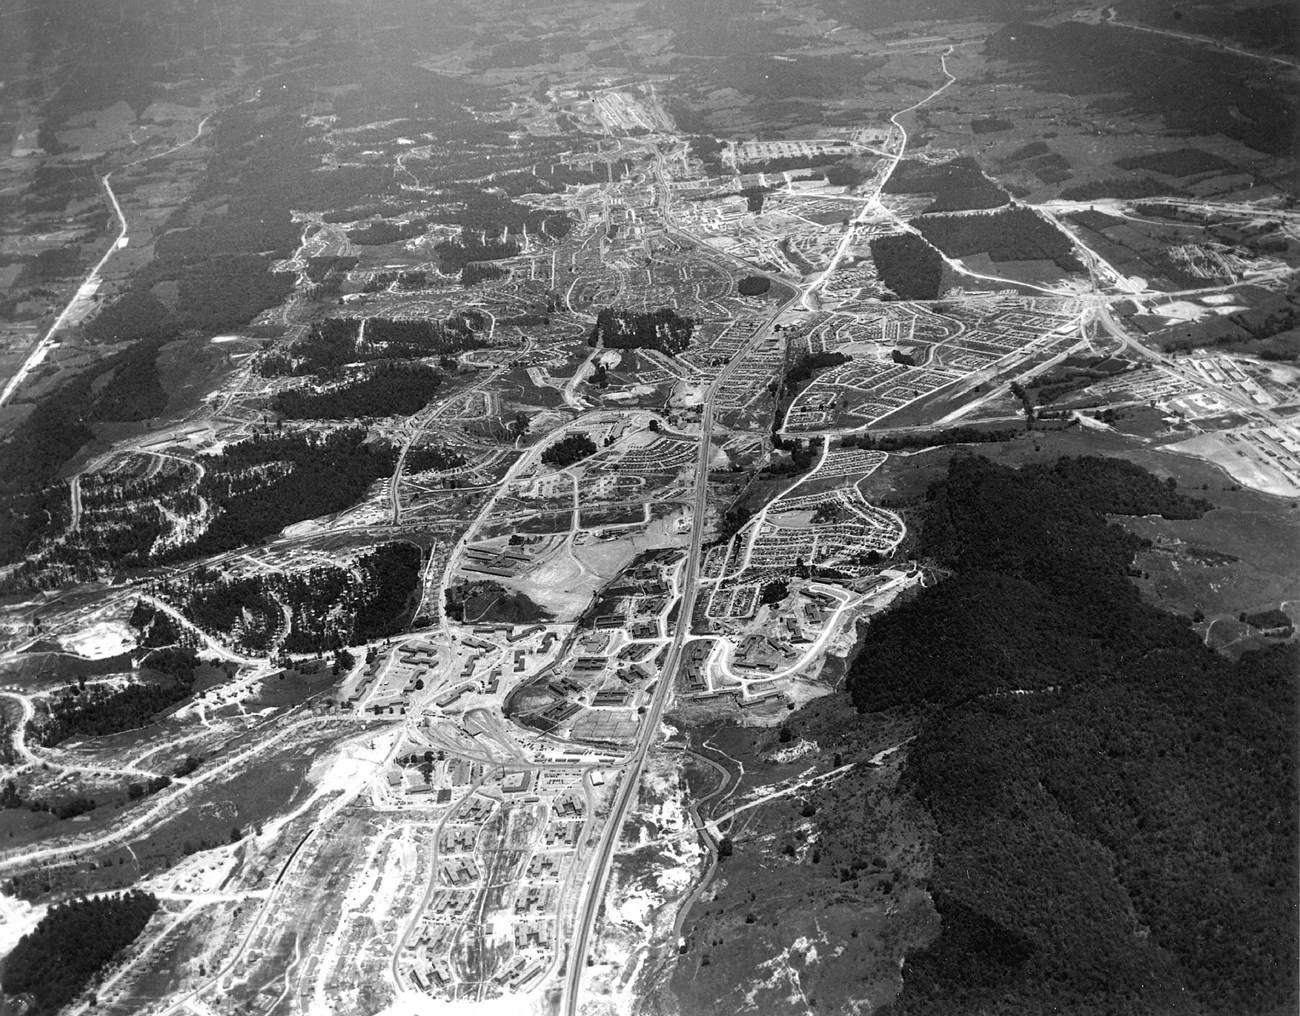 Aerial photo of Oak Ridge during the Manhattan Project